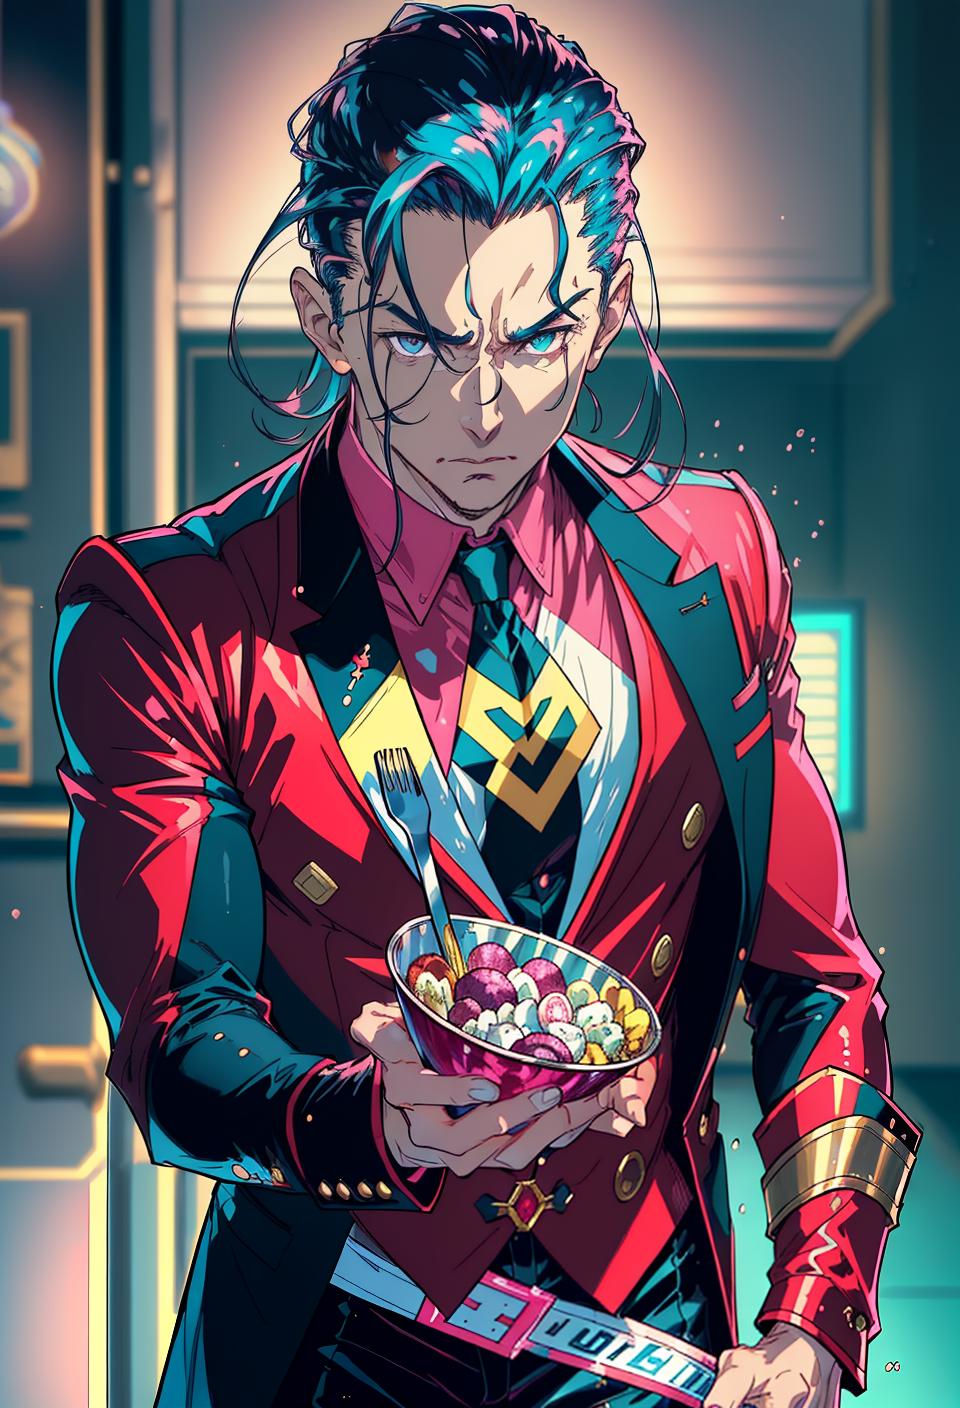  ((trending, highres, masterpiece, cinematic shot)), 1boy, mature, male superhero outfit, eating food, very long straight aqua hair, hair slicked back, large pink eyes, high class, elegant personality, mischievous expression, tanned skin, orderly, lucky